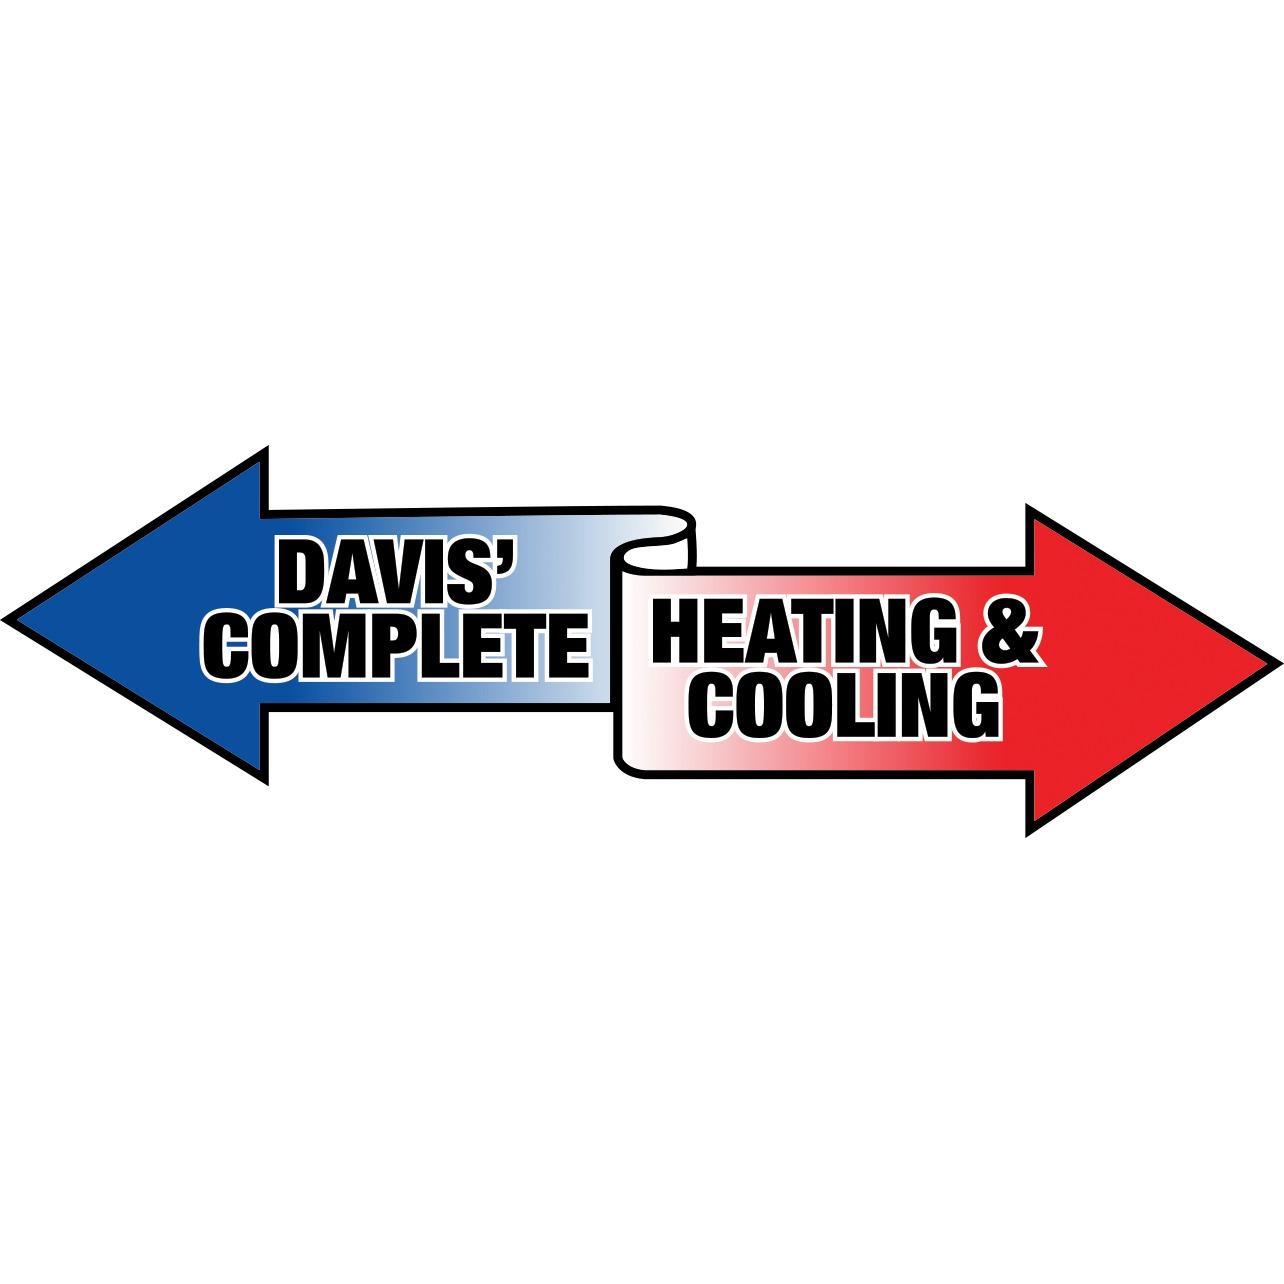 Davis Complete Heating & Cooling 1301 Avenue L, Sterling Illinois 61081